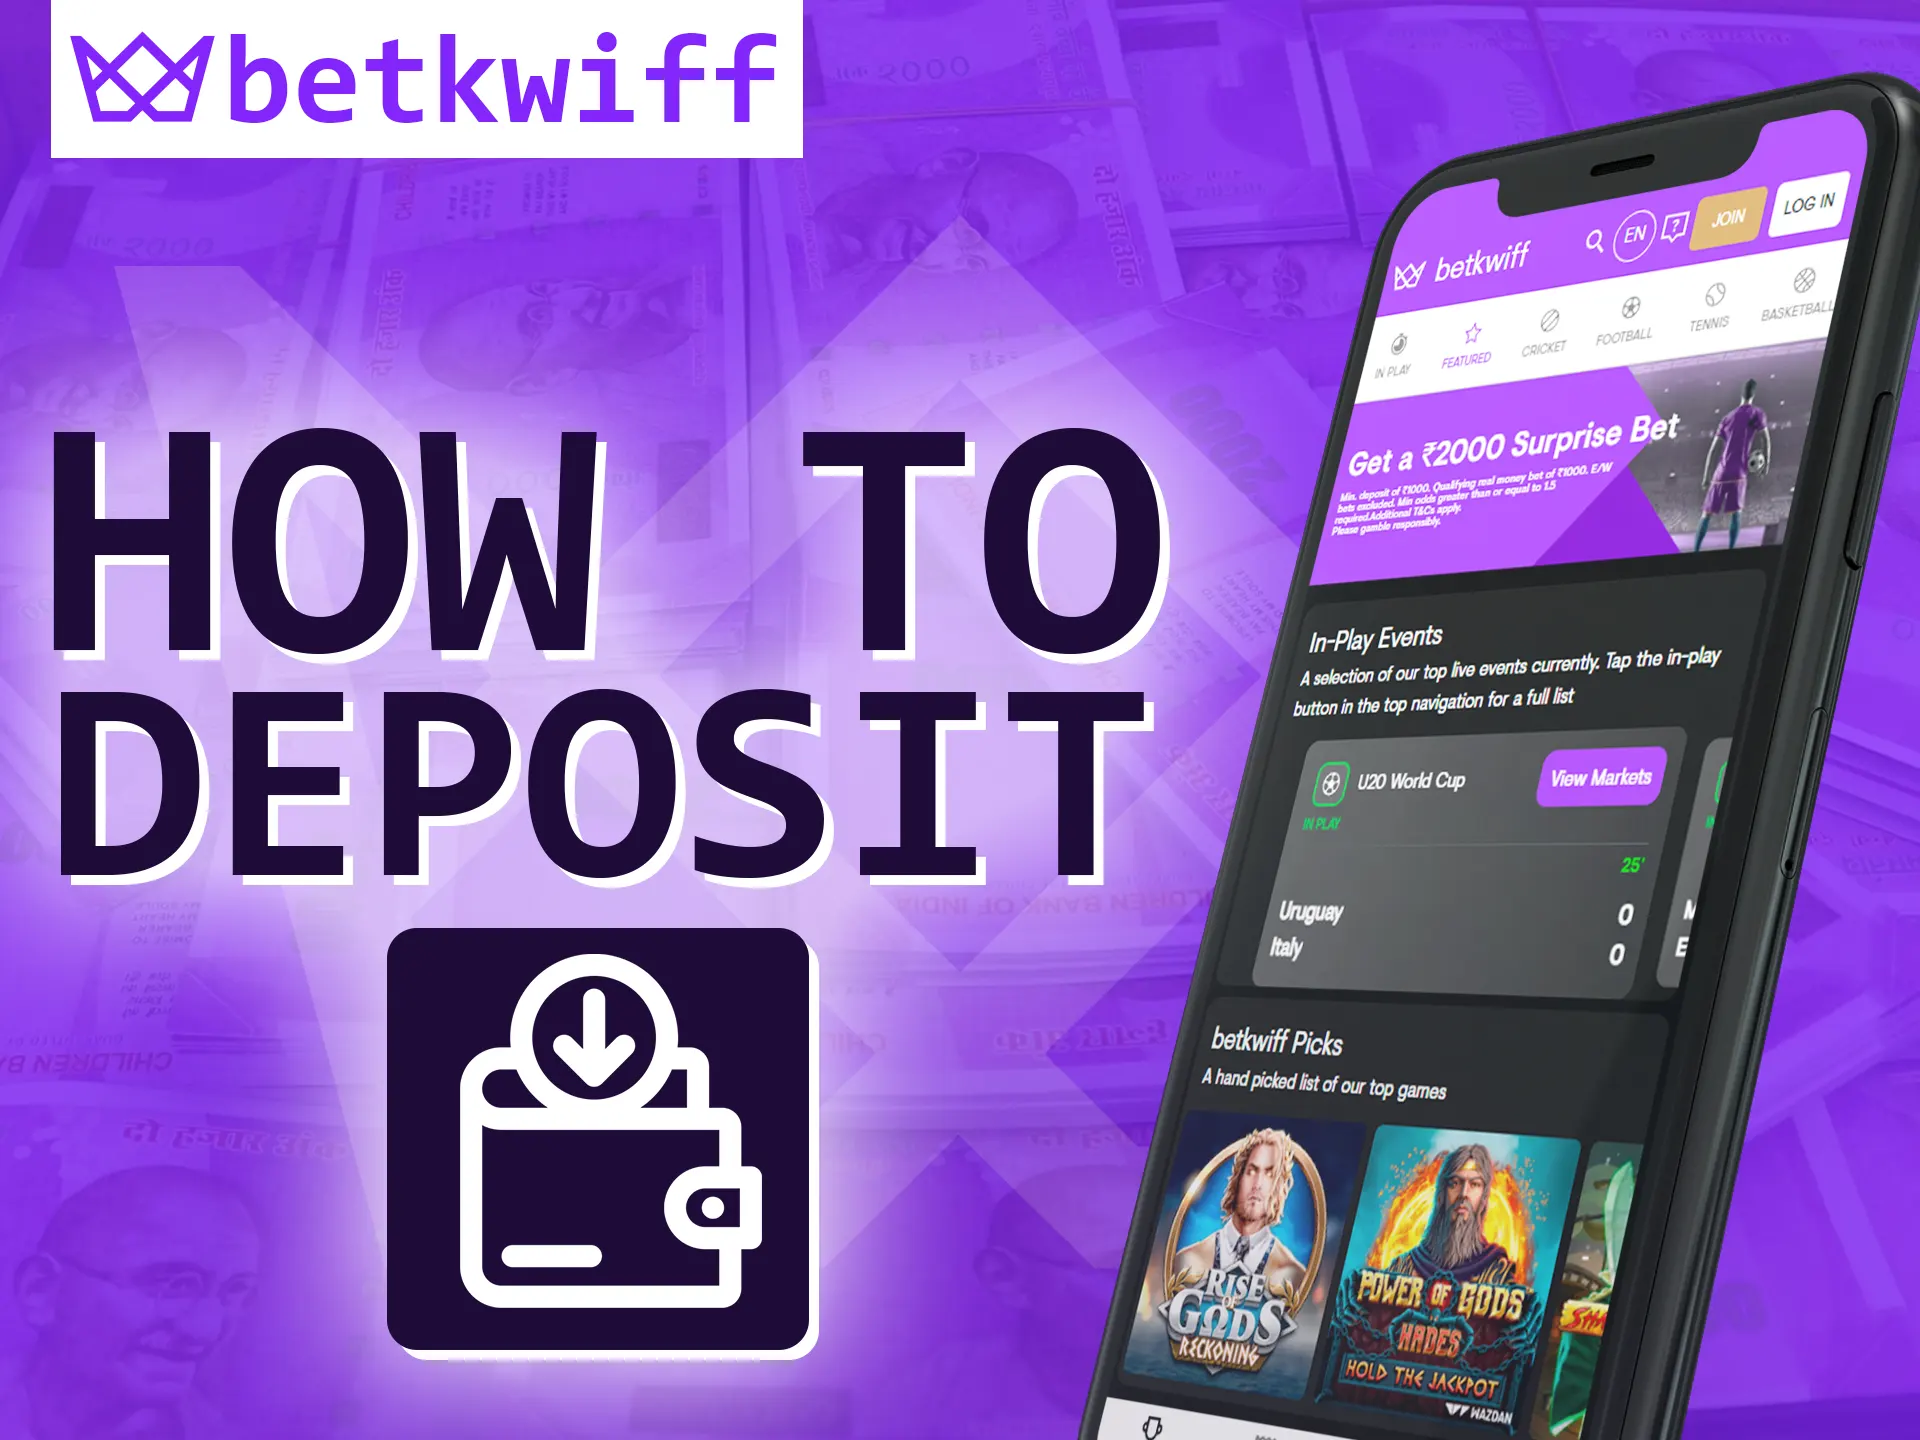 With the Betkwiff app you can always easily make a deposit.